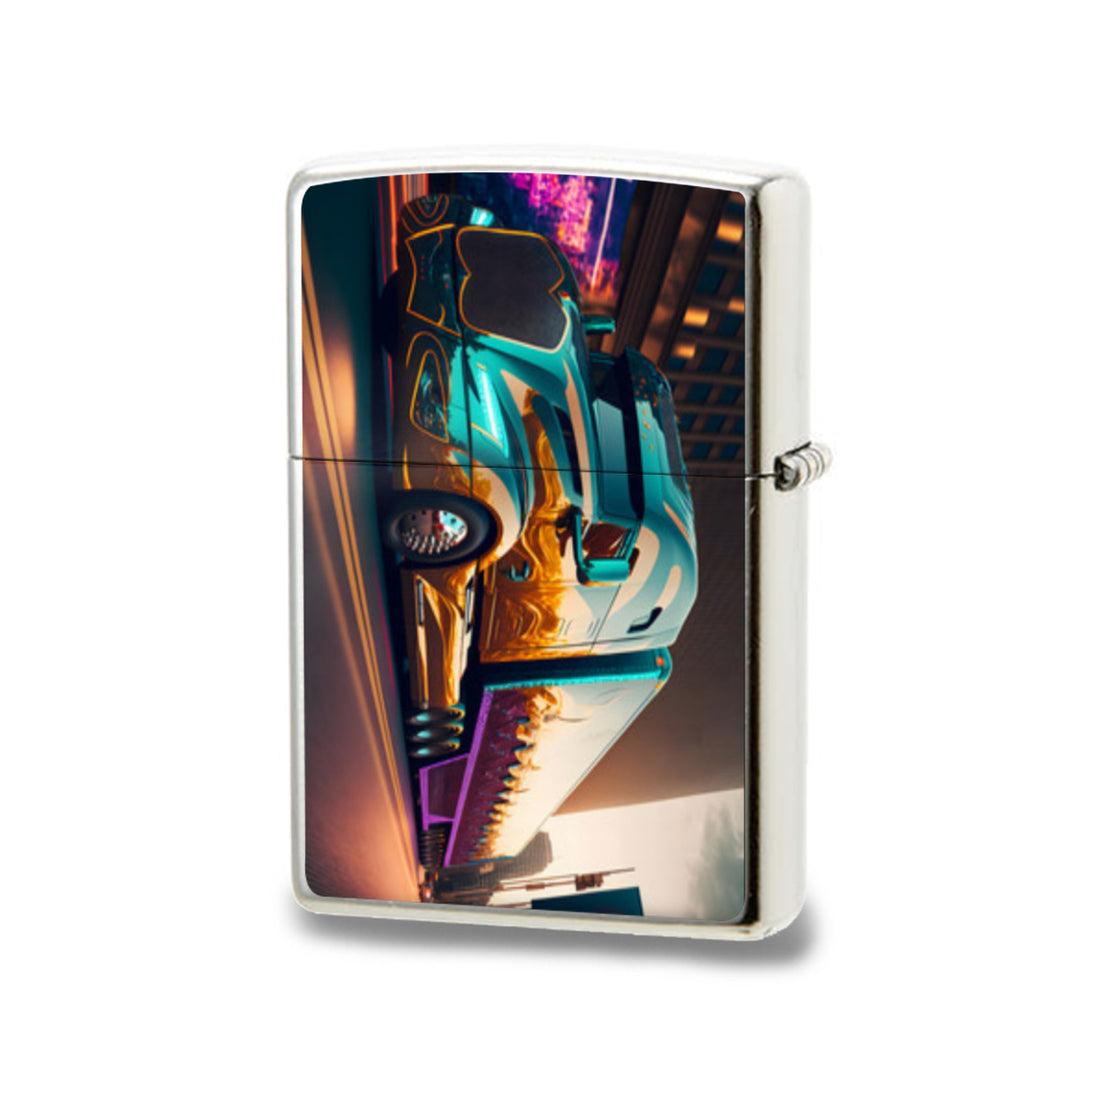 Truck in Colors Lighter Case｜ High quality aluminum Home-clothes-jewelry